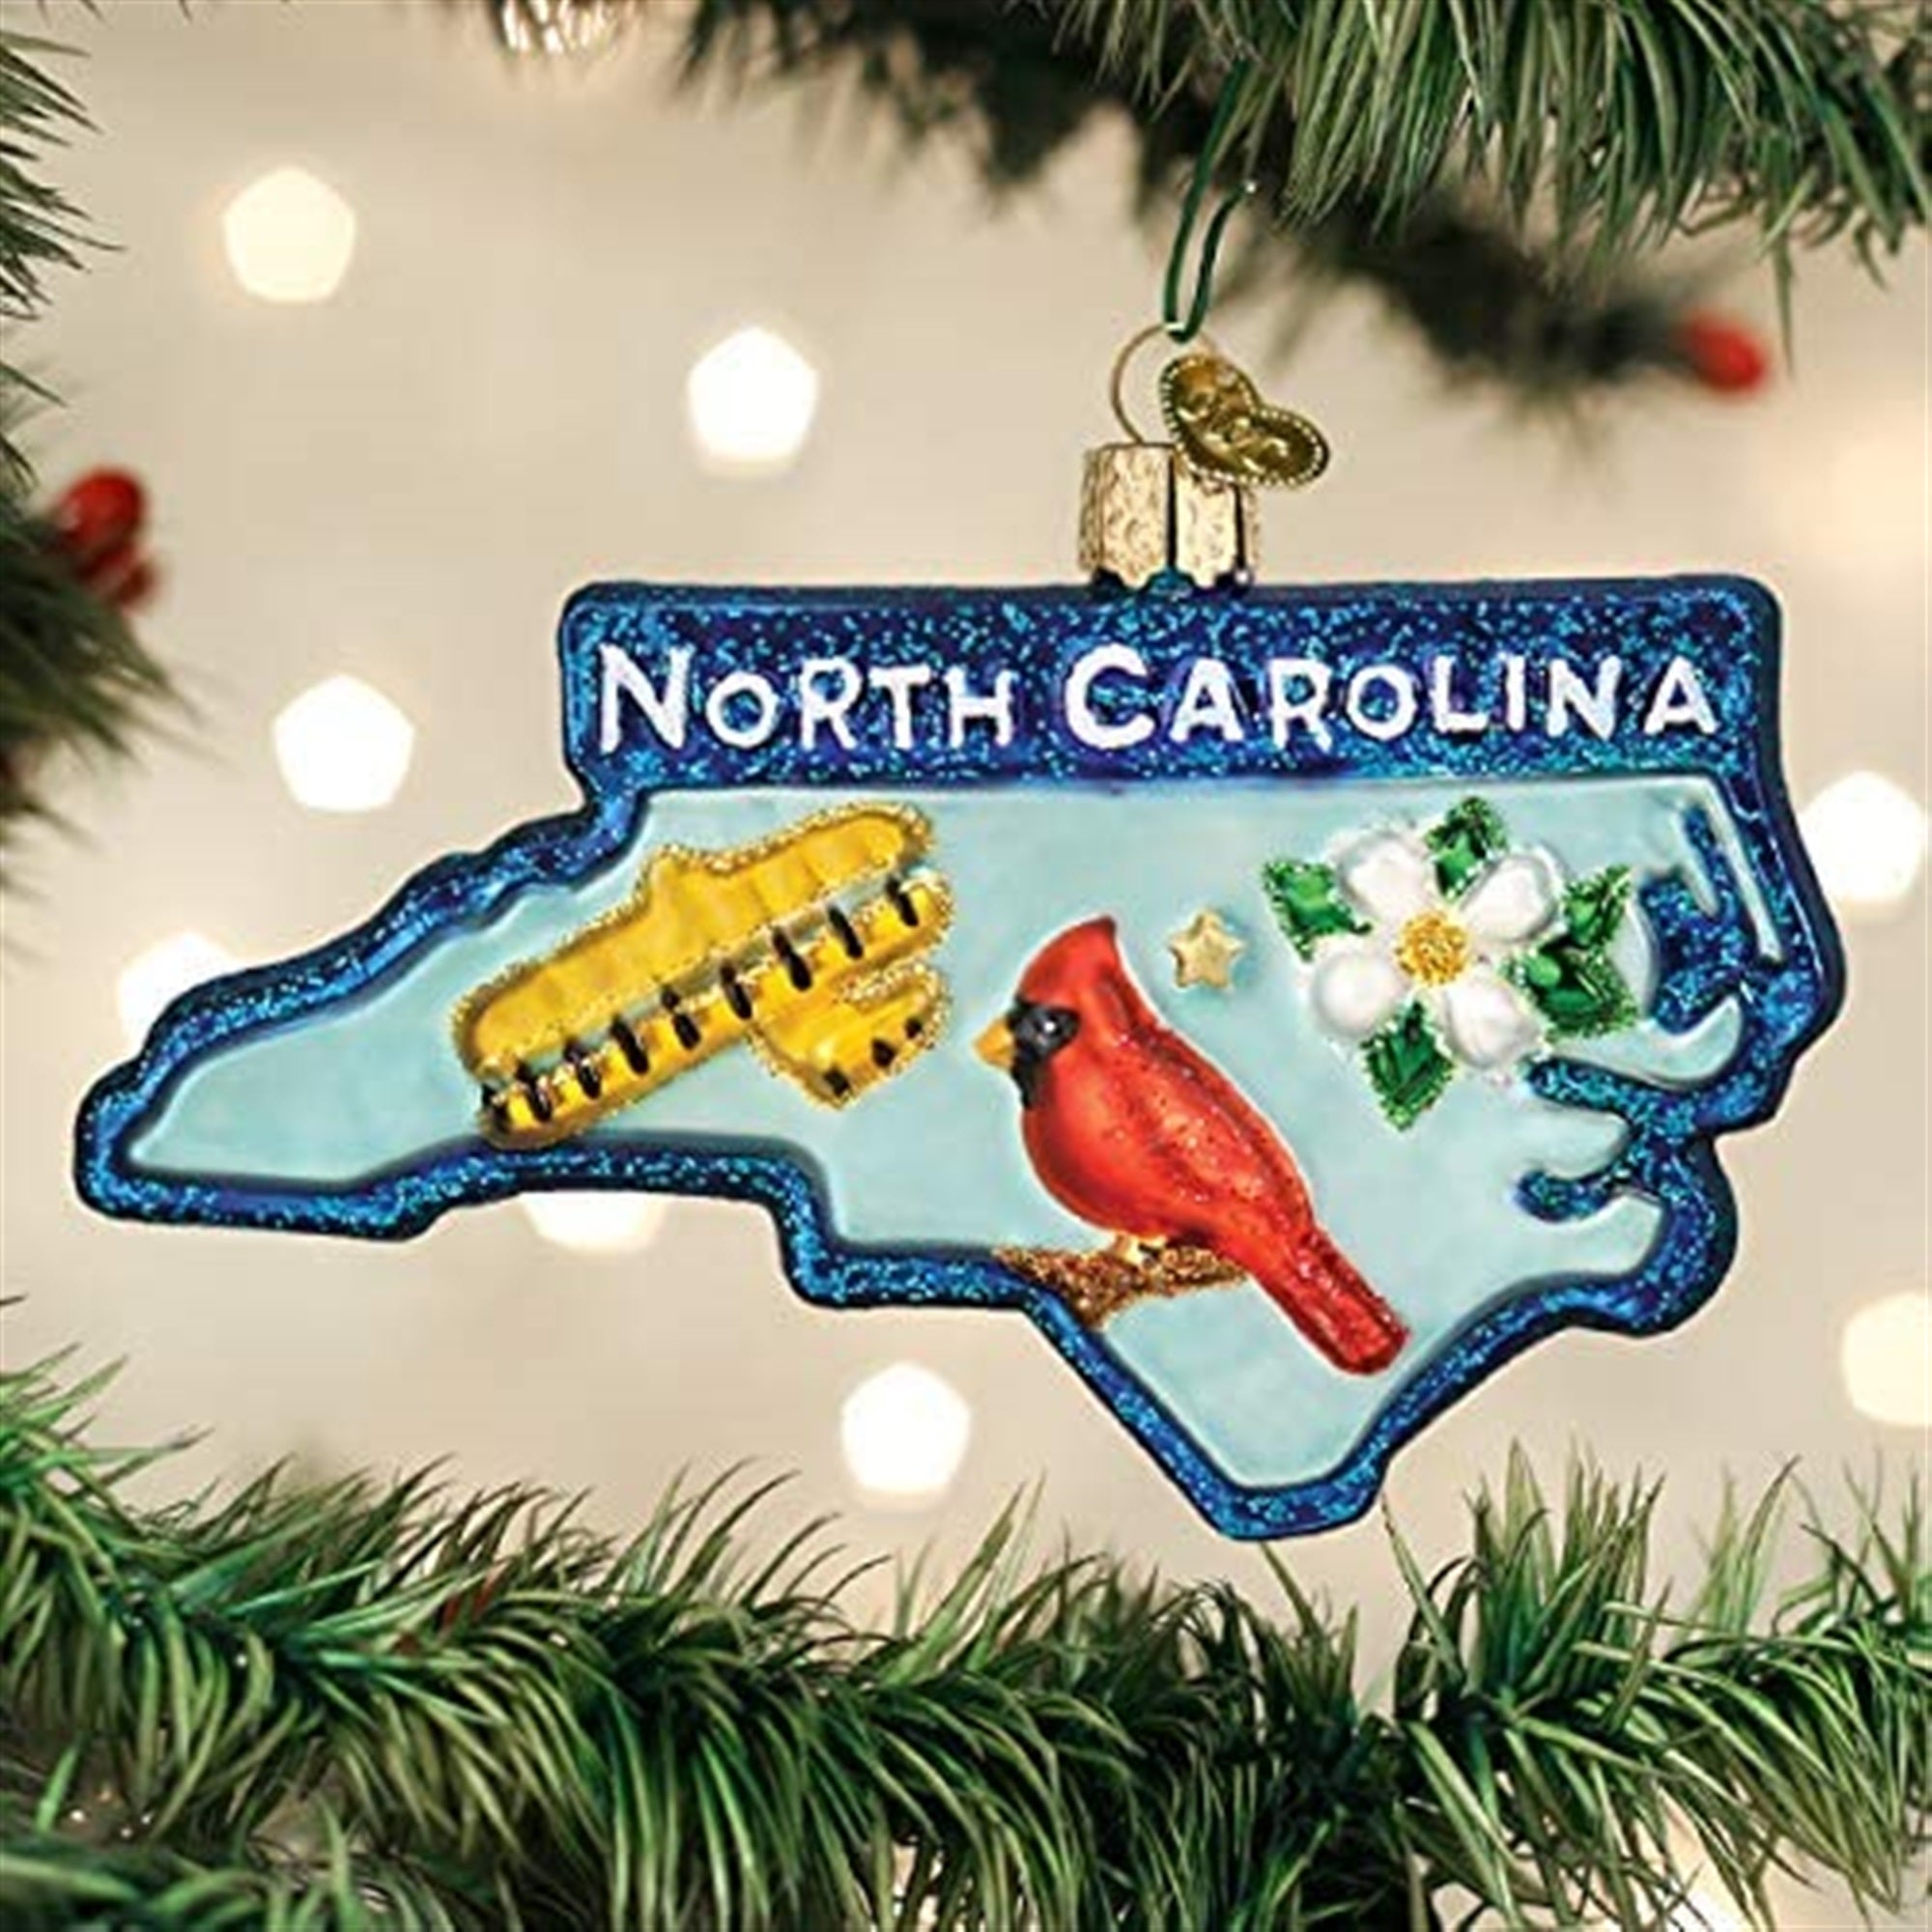 Old World Christmas Ornaments State of North Carolina Glass Blown Ornaments for Christmas Tree